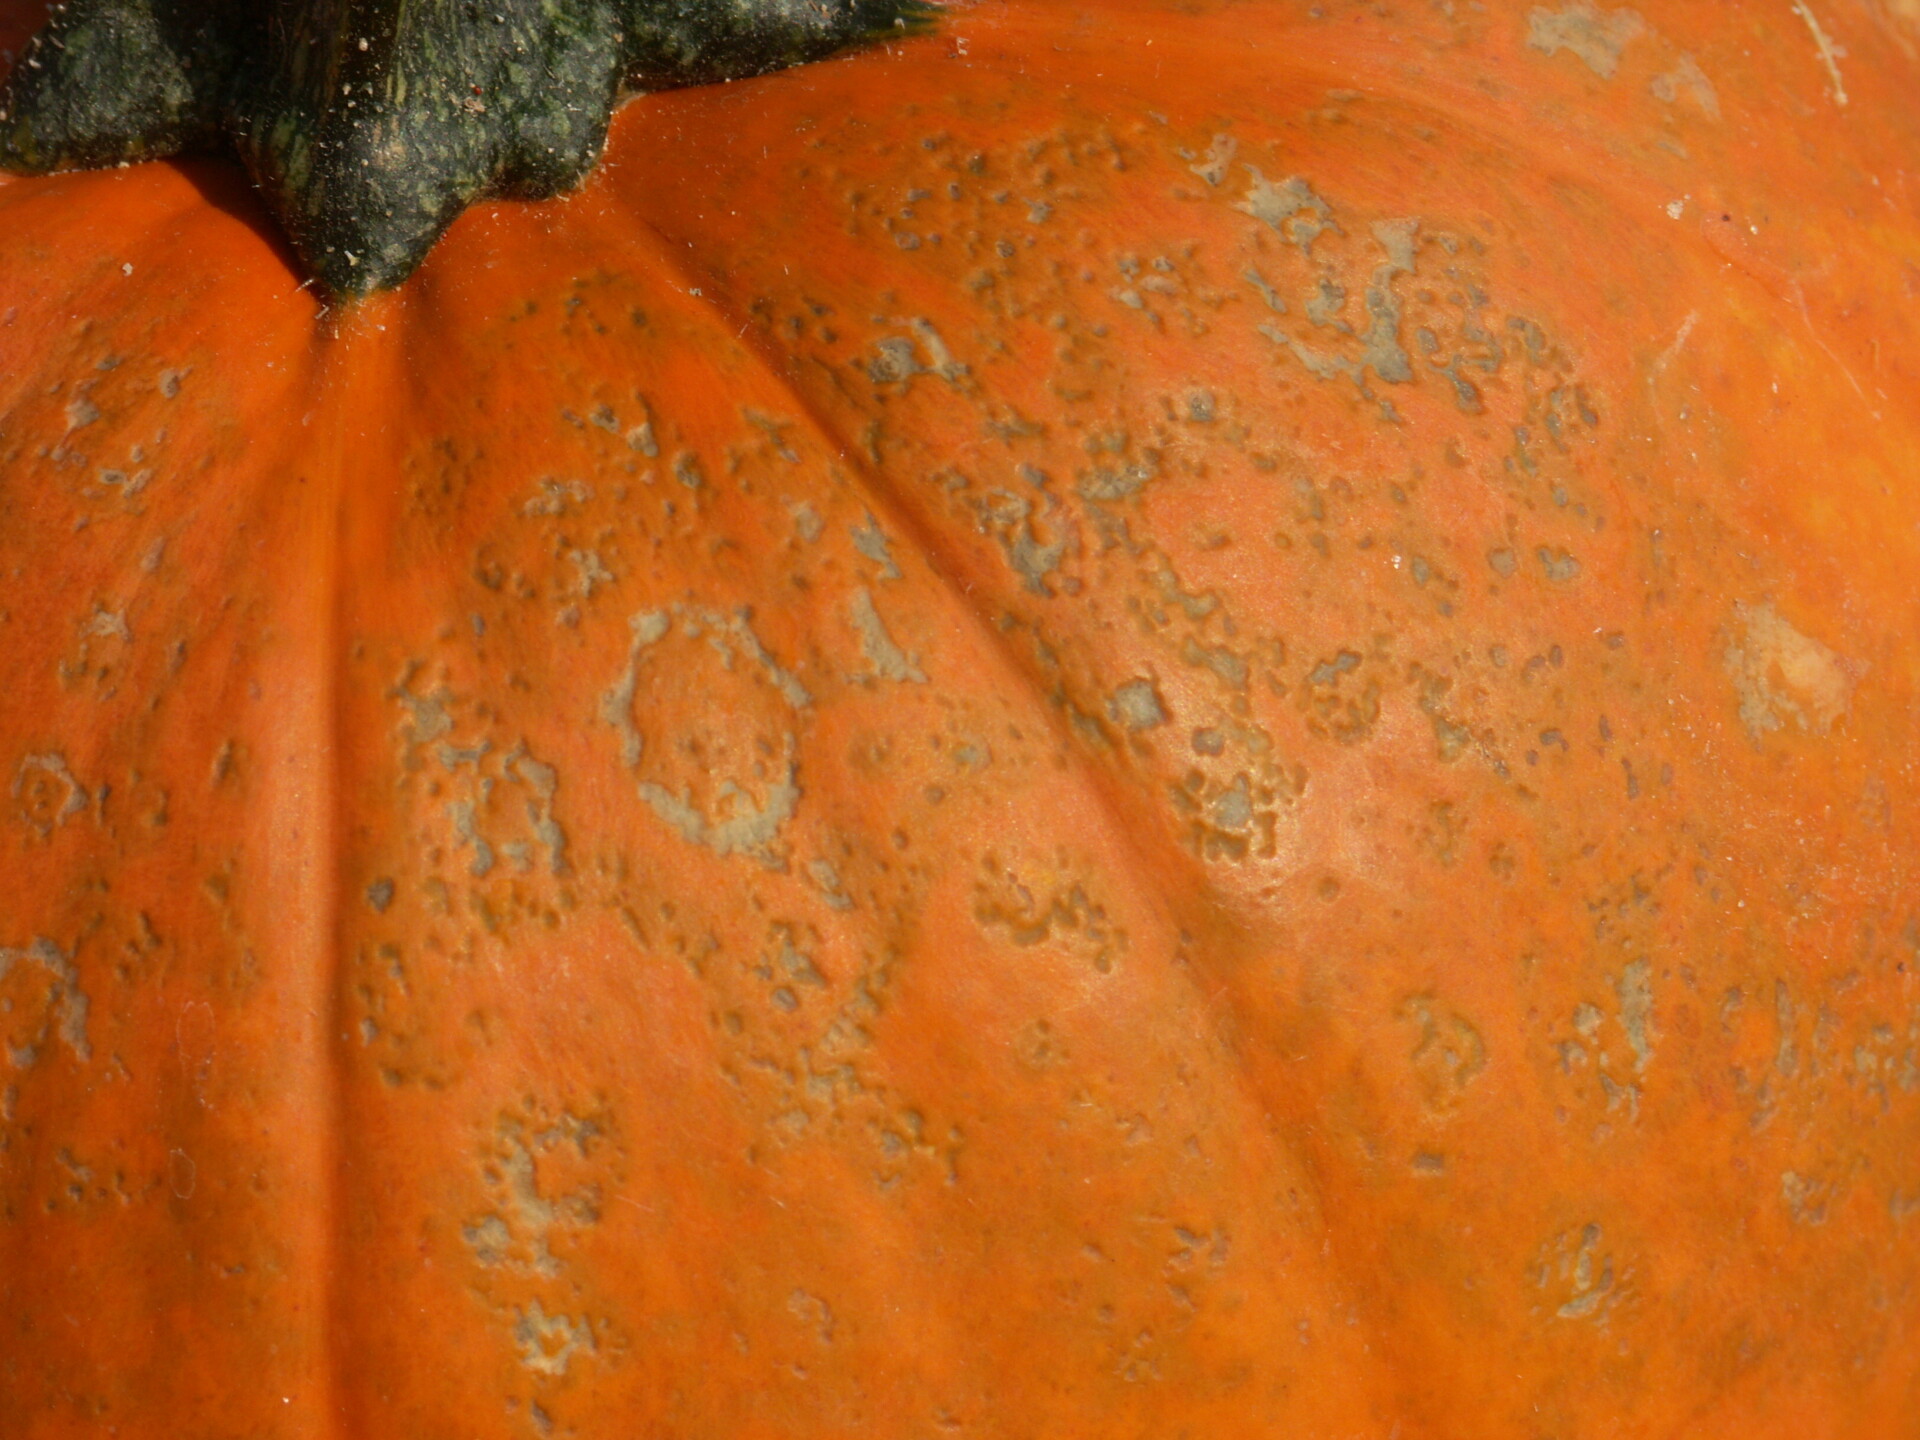 Figure 2. This pumpkin test positive for Watermelon mosaic virus 2 and zucchini mosaic virus, both poty viruses. Note the sunken, gray, mostly circular lesions.